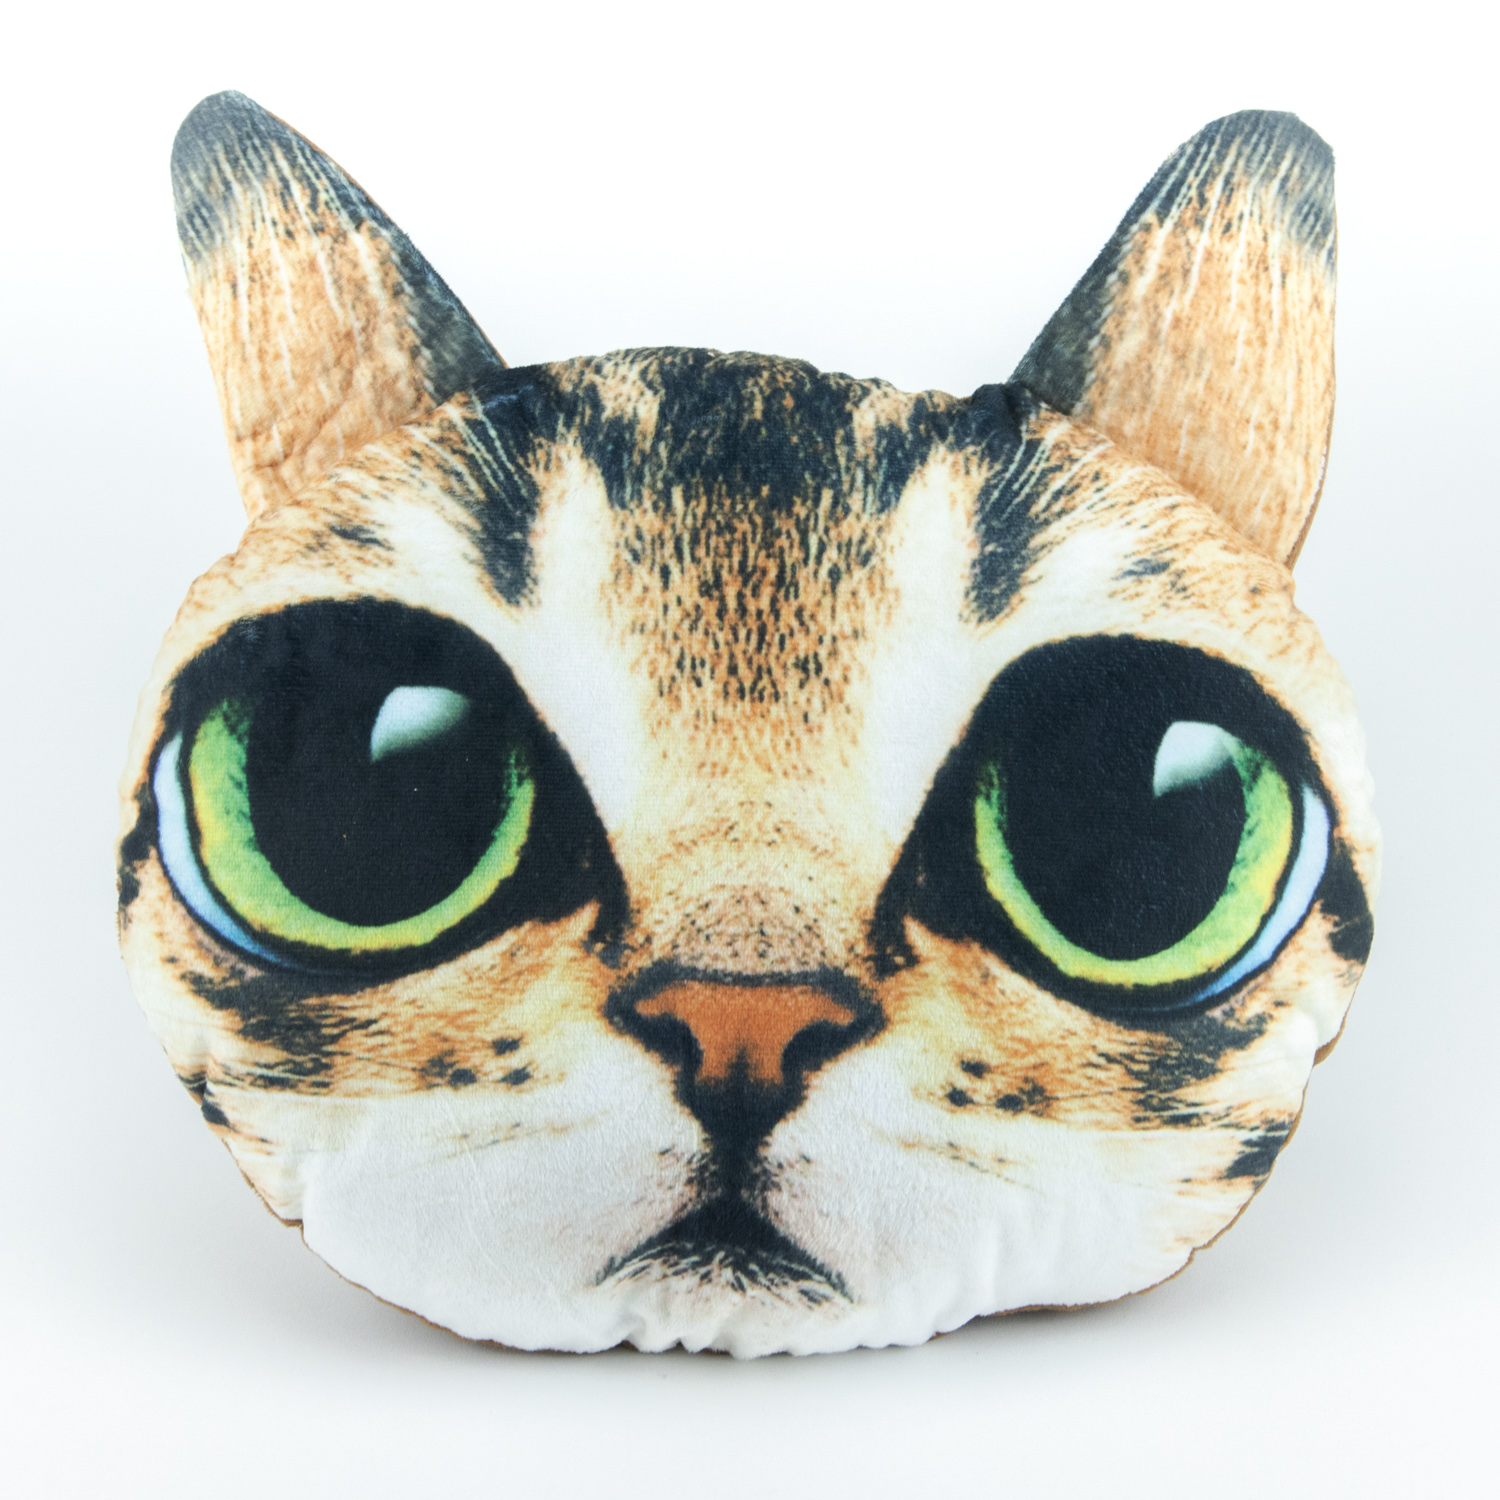 Cat Face Sofa Pillow - Domestic Green Eyes - Puppy Party